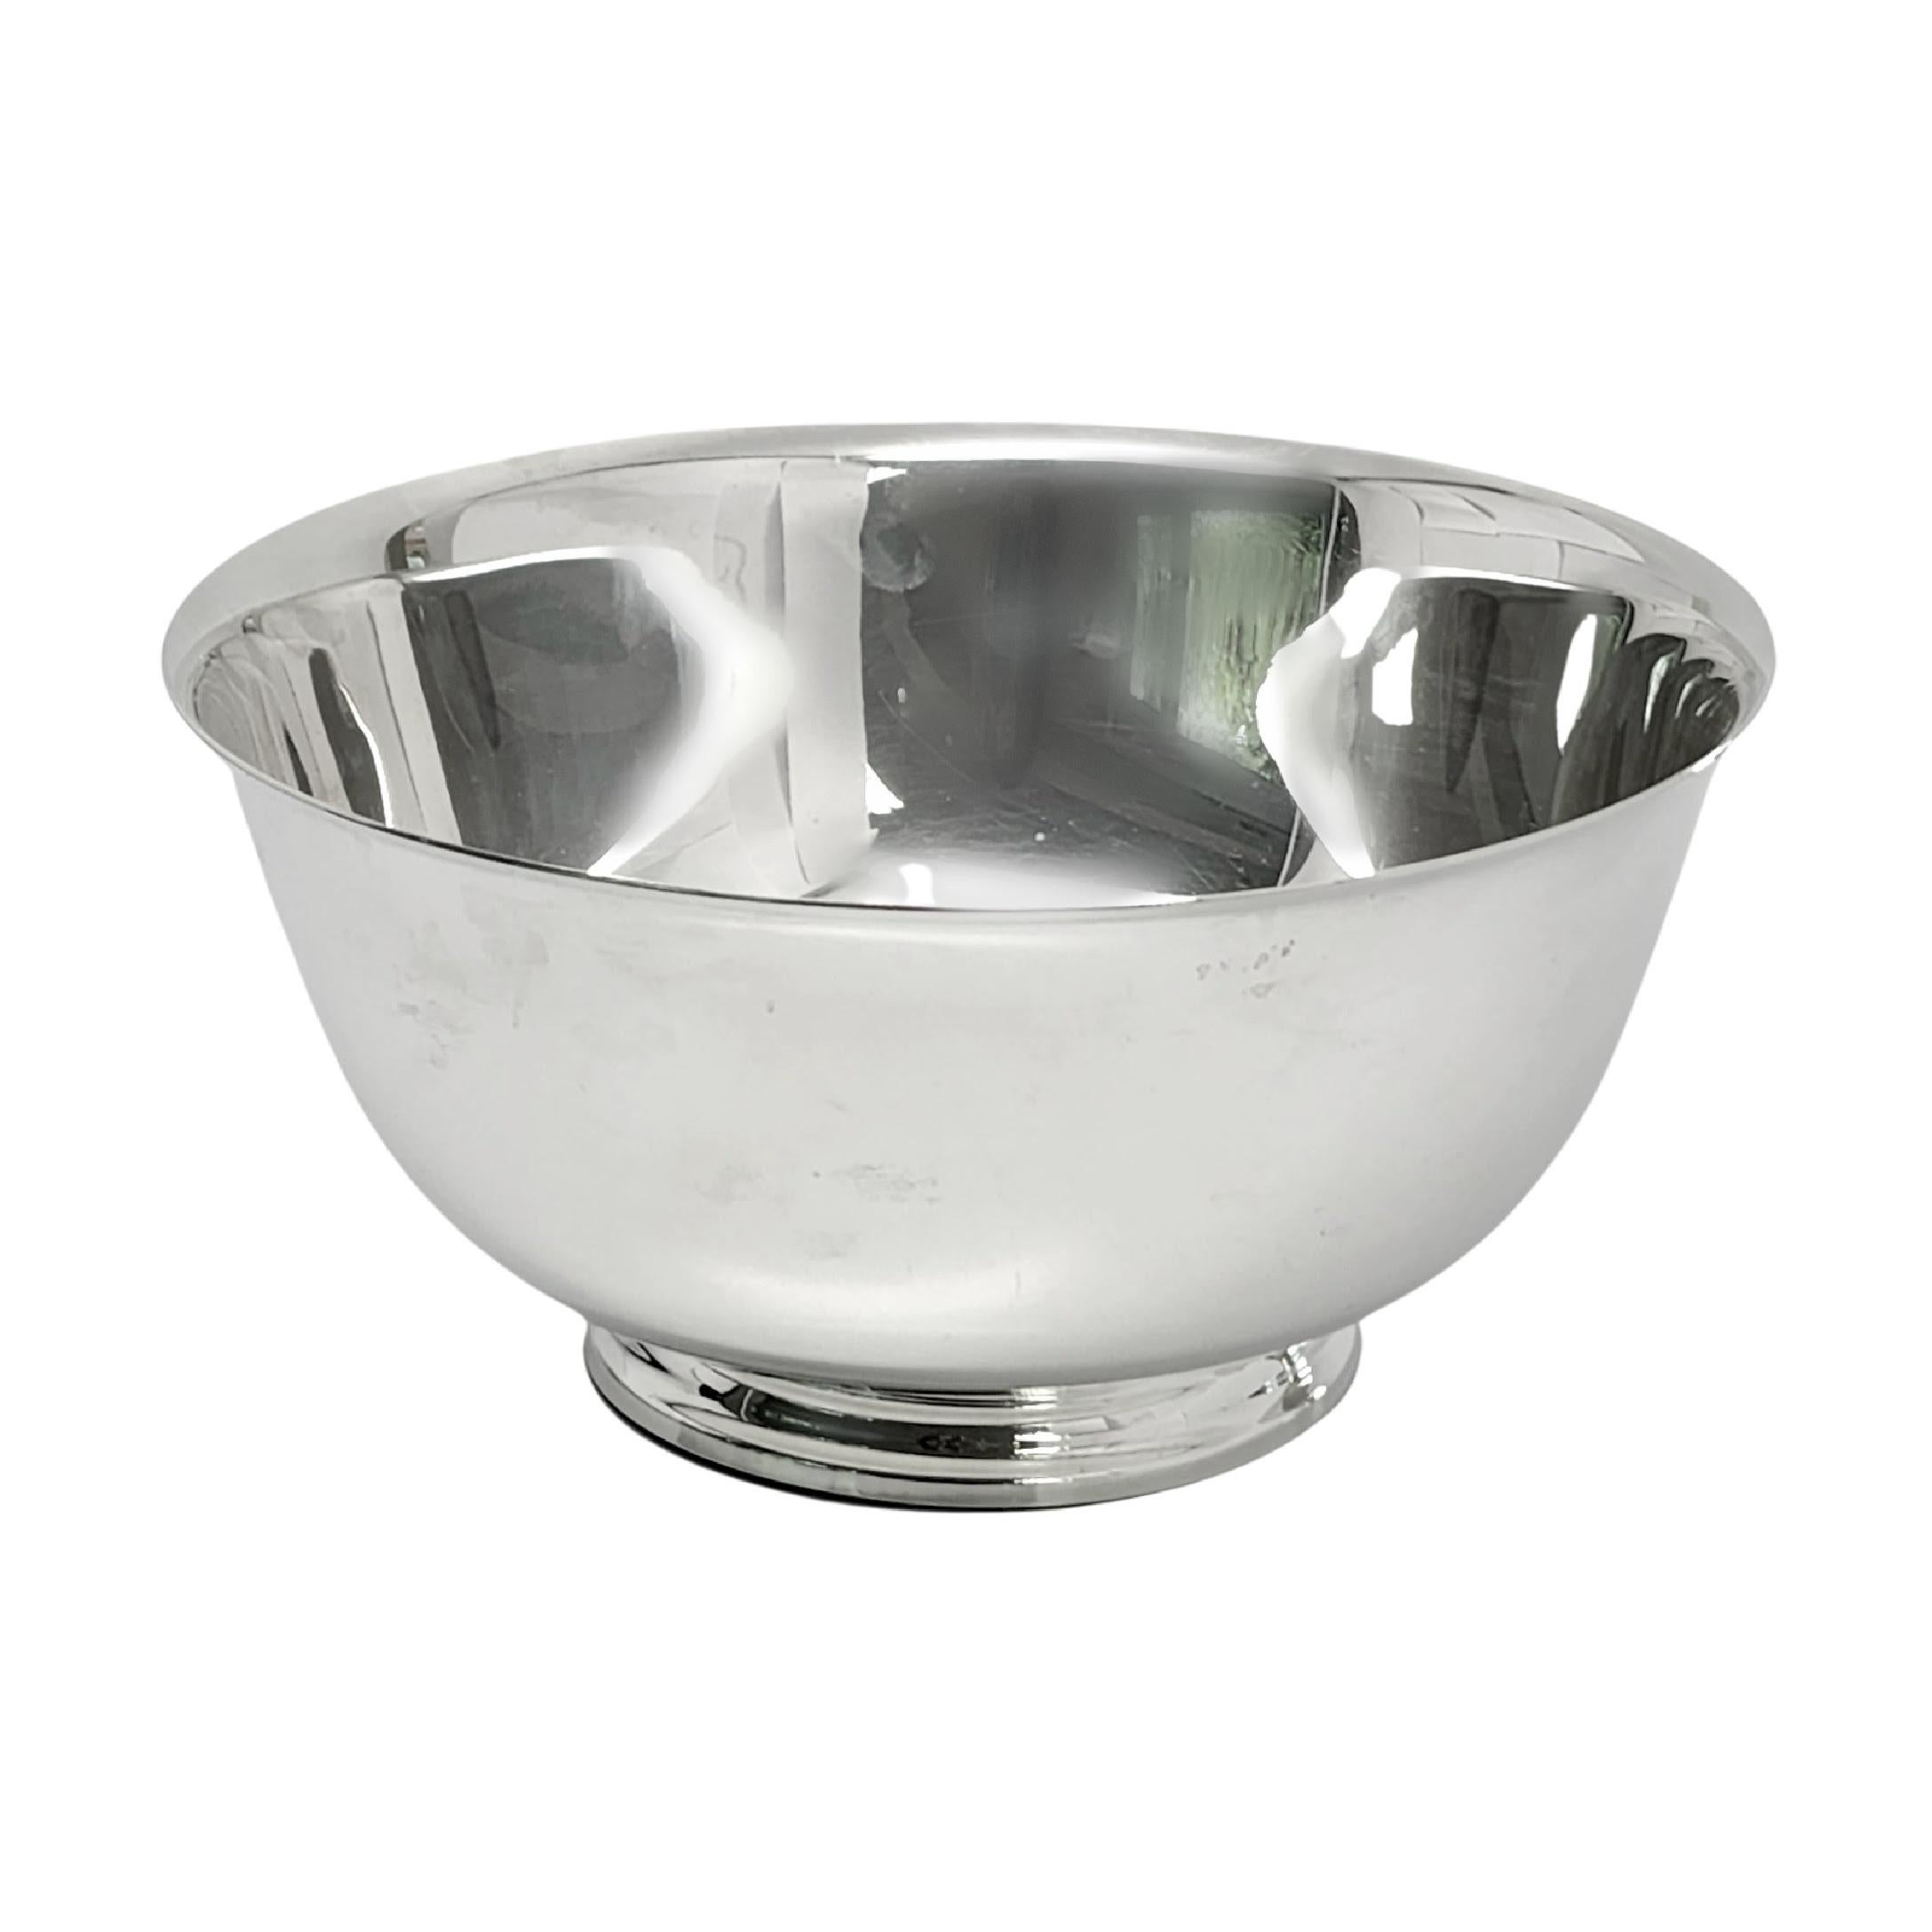 Tiffany & Co Sterling Silver 23618 Paul Revere Footed Bowl with Box 2